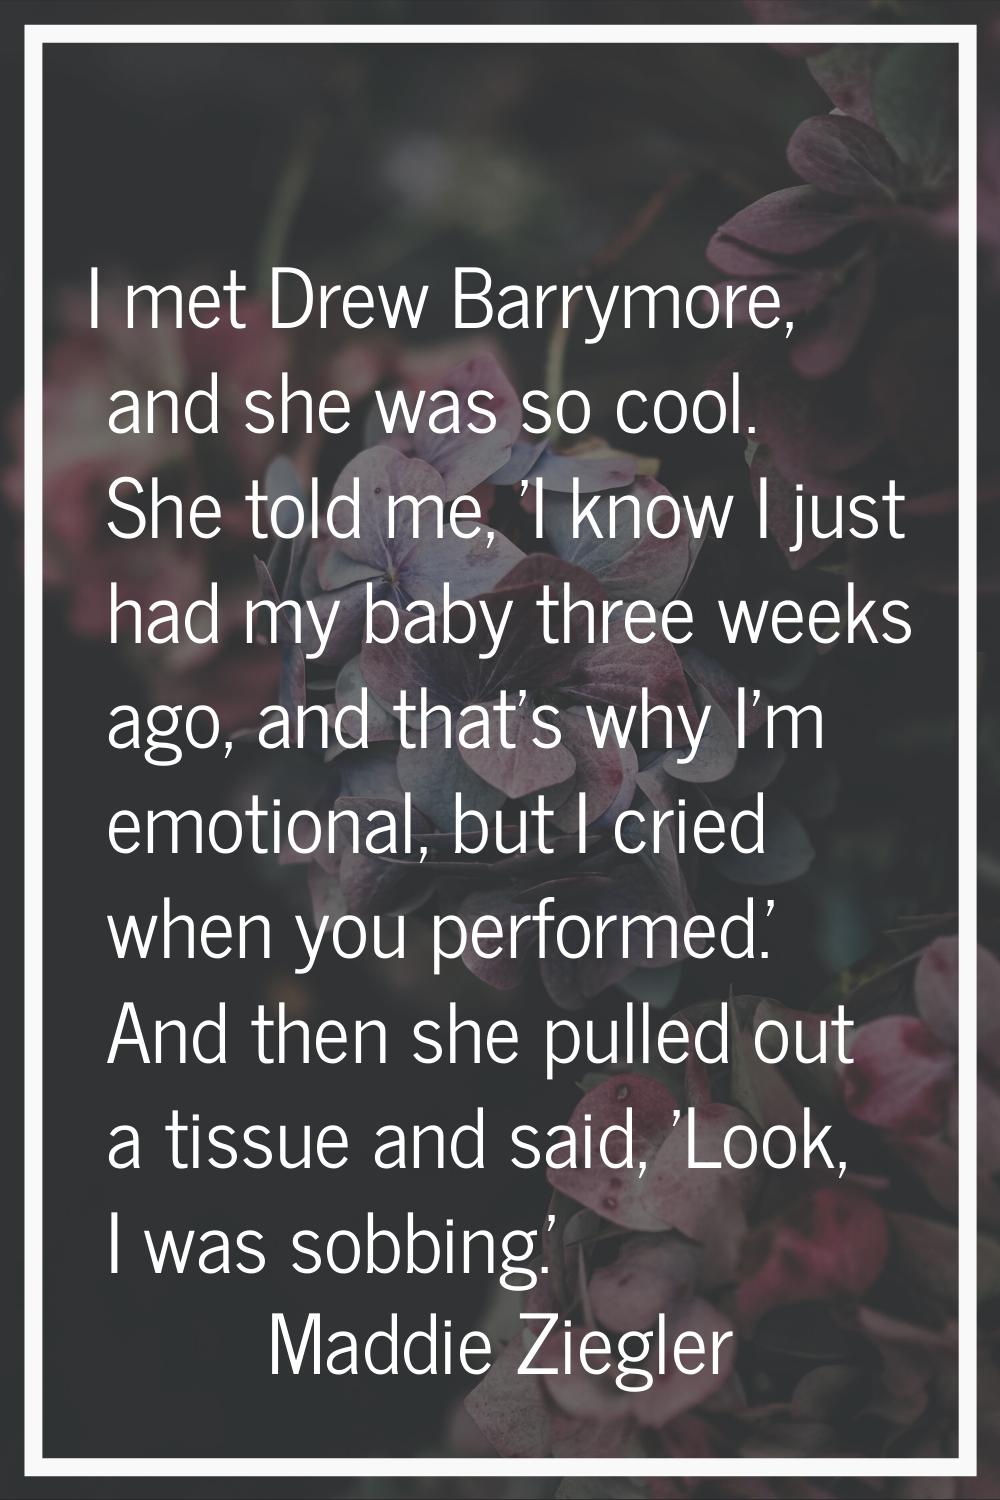 I met Drew Barrymore, and she was so cool. She told me, 'I know I just had my baby three weeks ago,